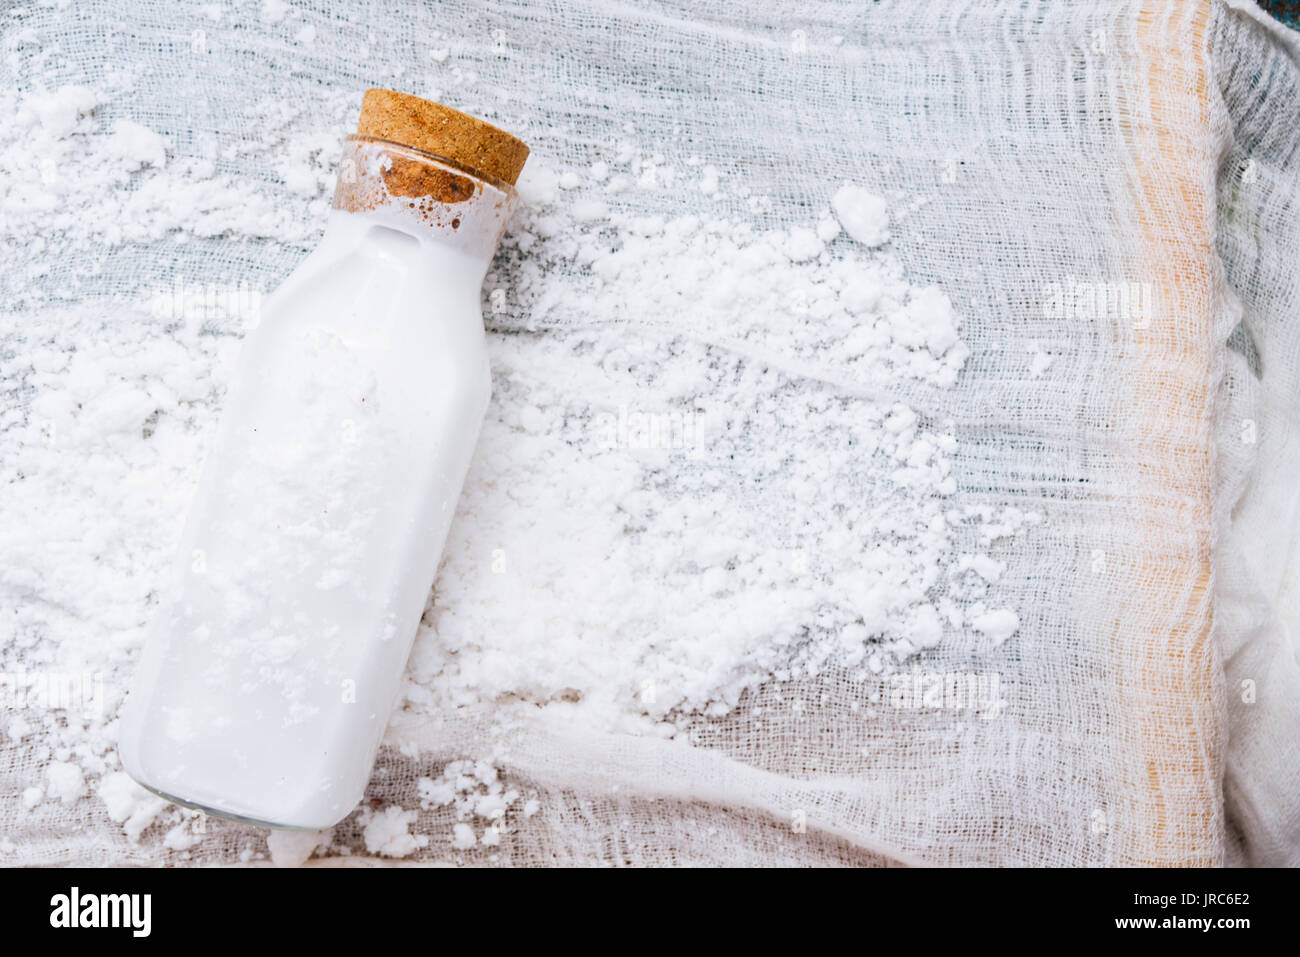 Homemade coconut milk in a bottle, mixed in a blender and pressed through a cotton sieve, over a coconut essicated powder on a white background Stock Photo